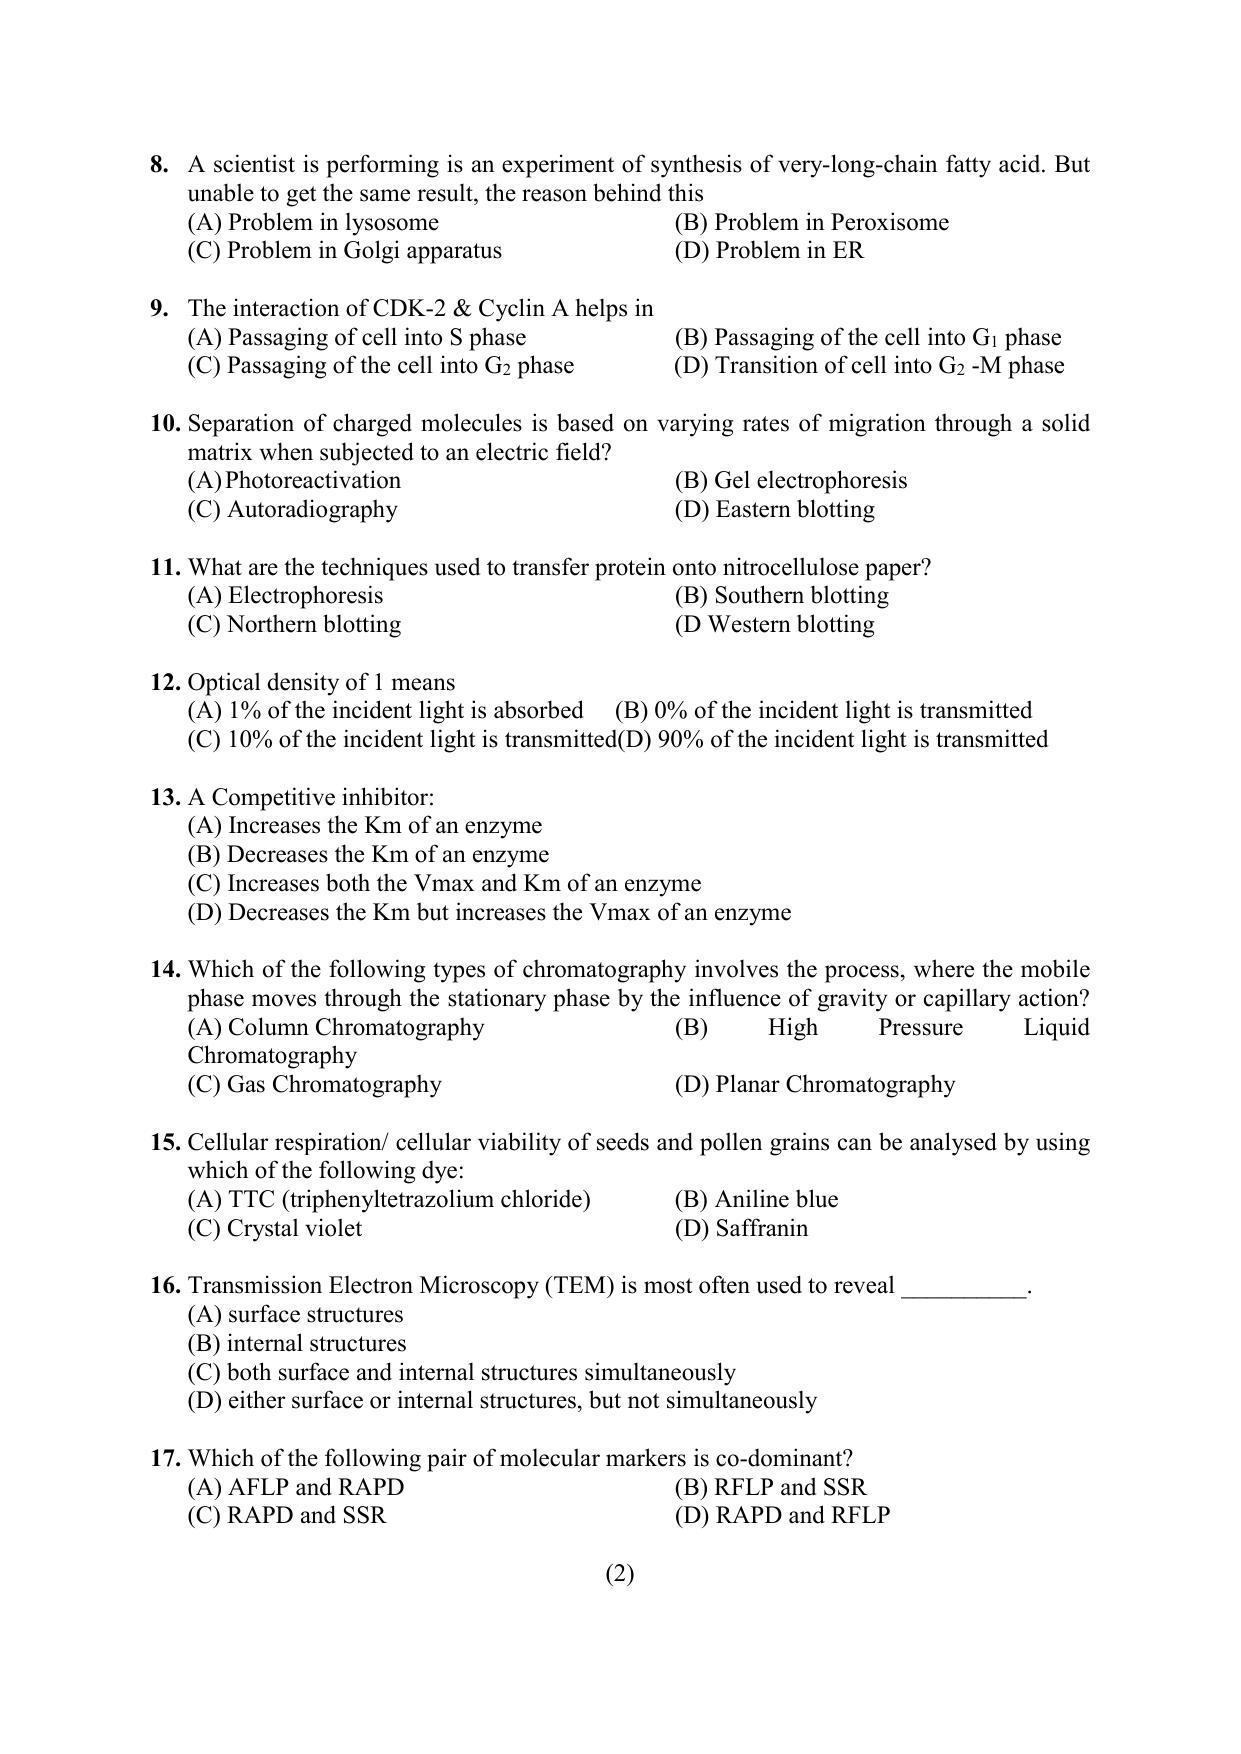 PU MPET Anthropology 2022 Question Papers - Page 19